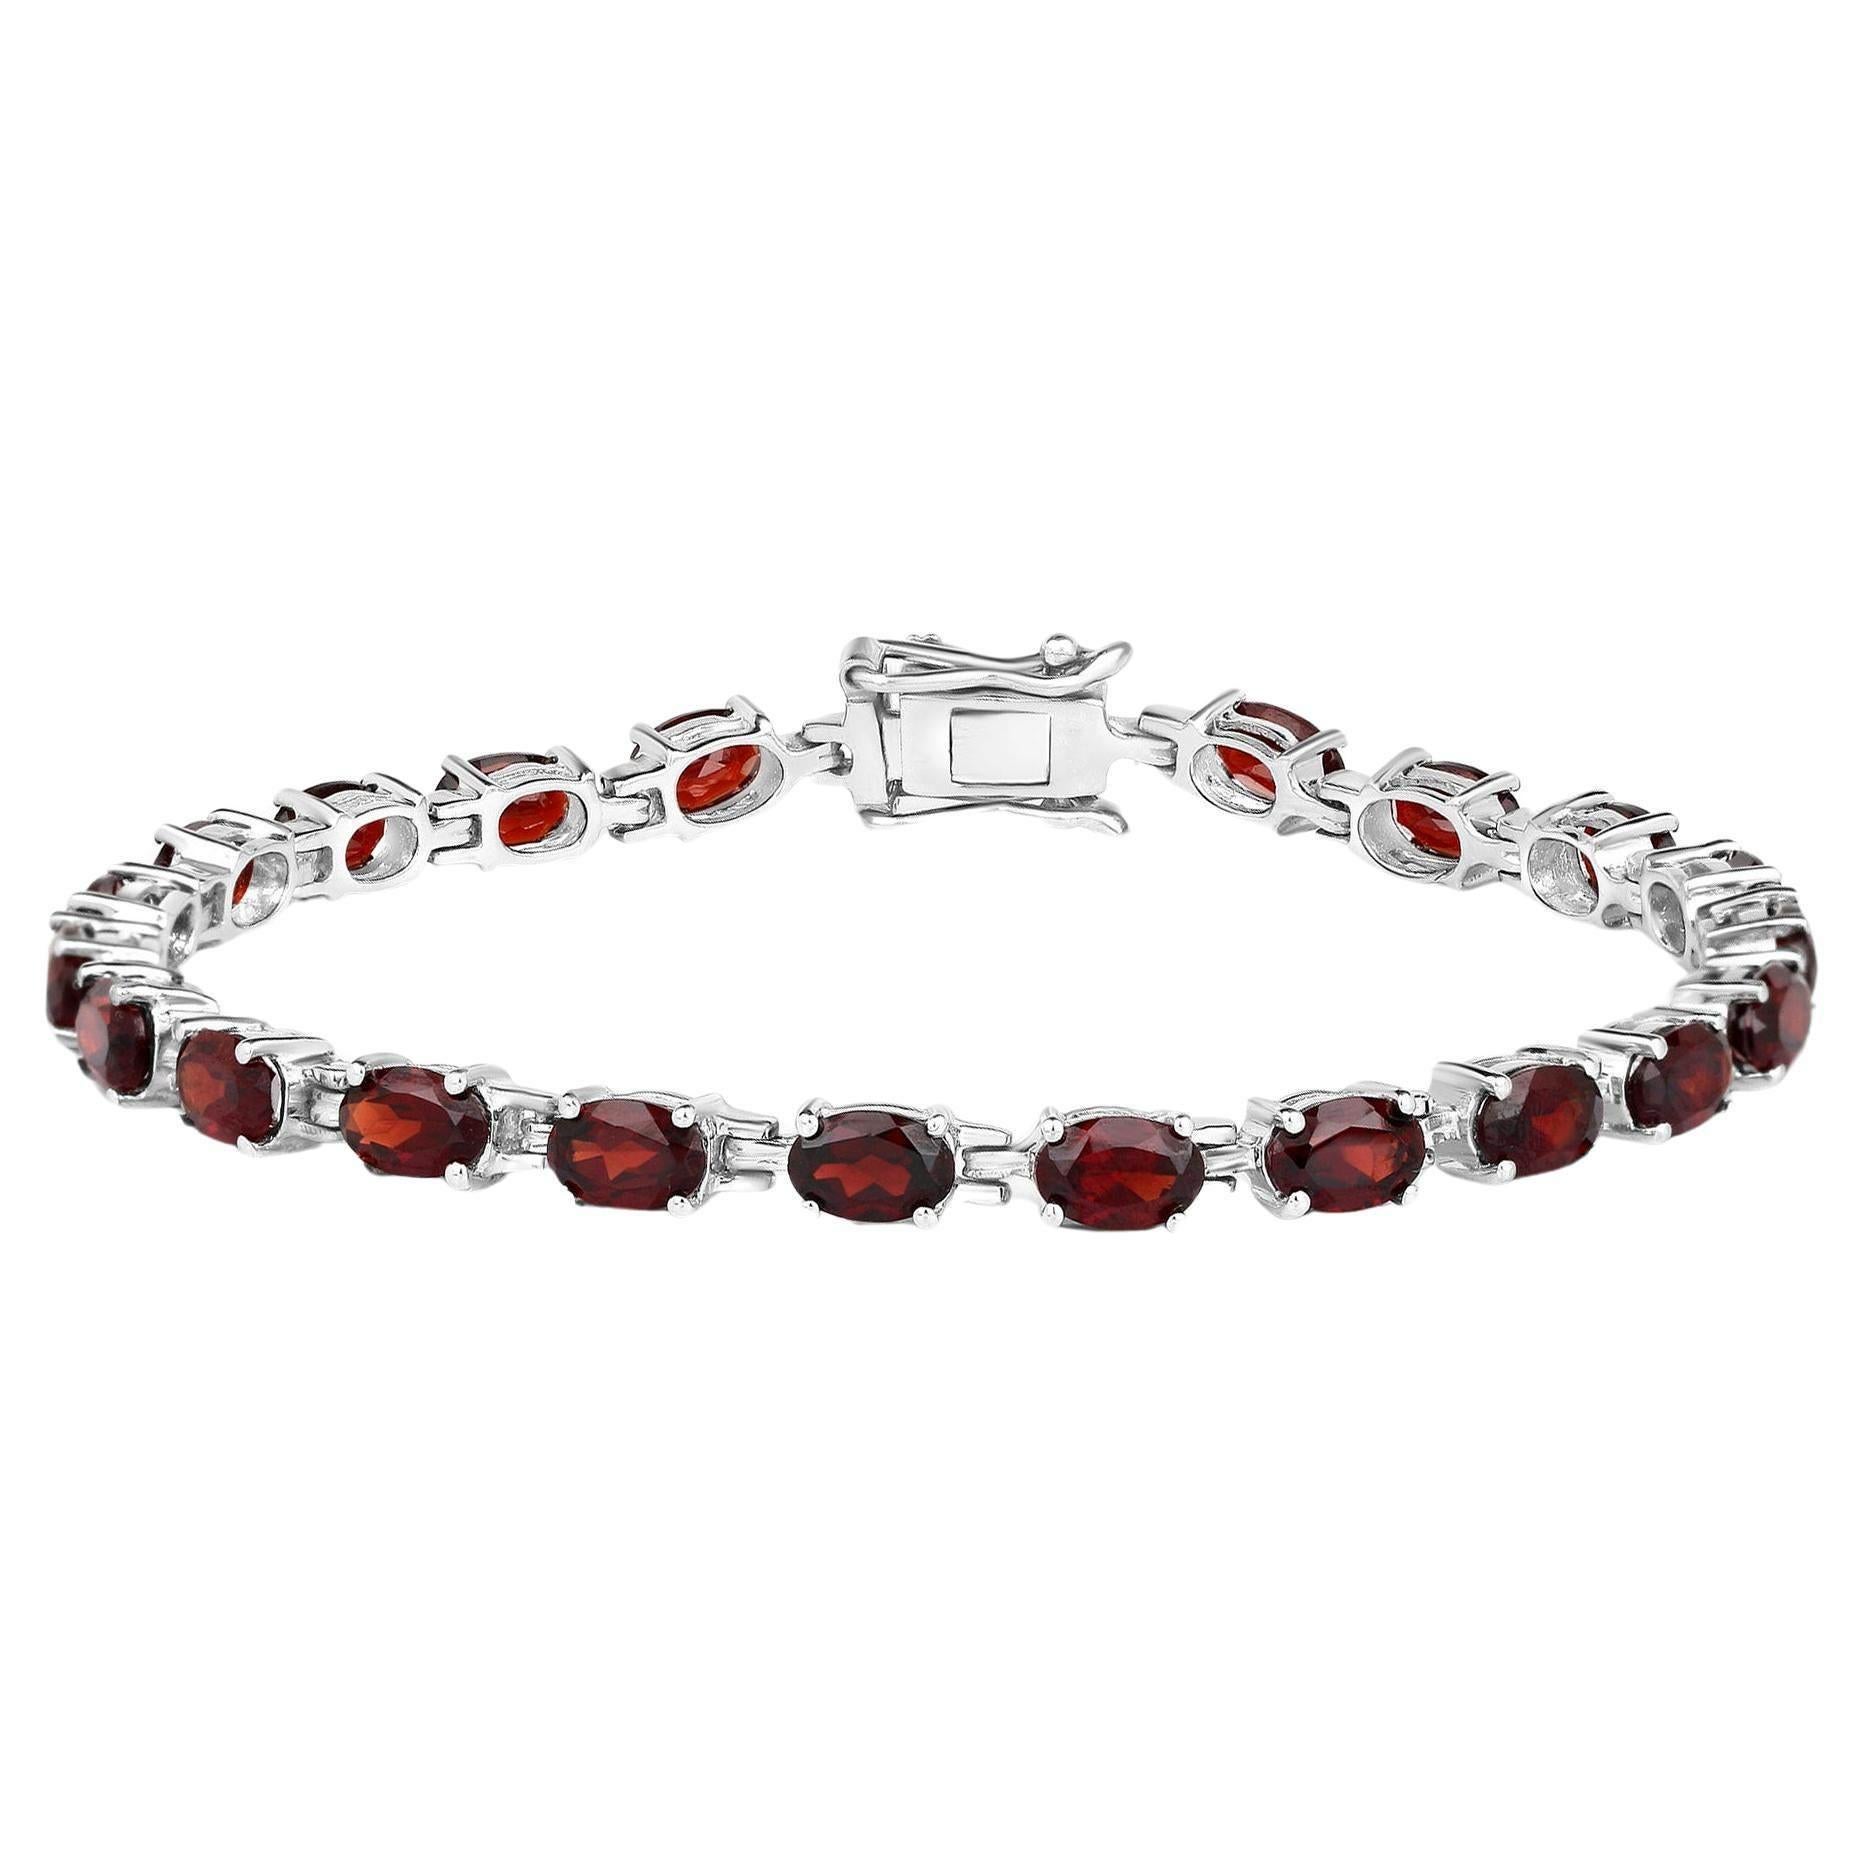 Contemporary Red Garnet Tennis Bracelet 11.25 Carats Rhodium Plated Sterling Silver For Sale